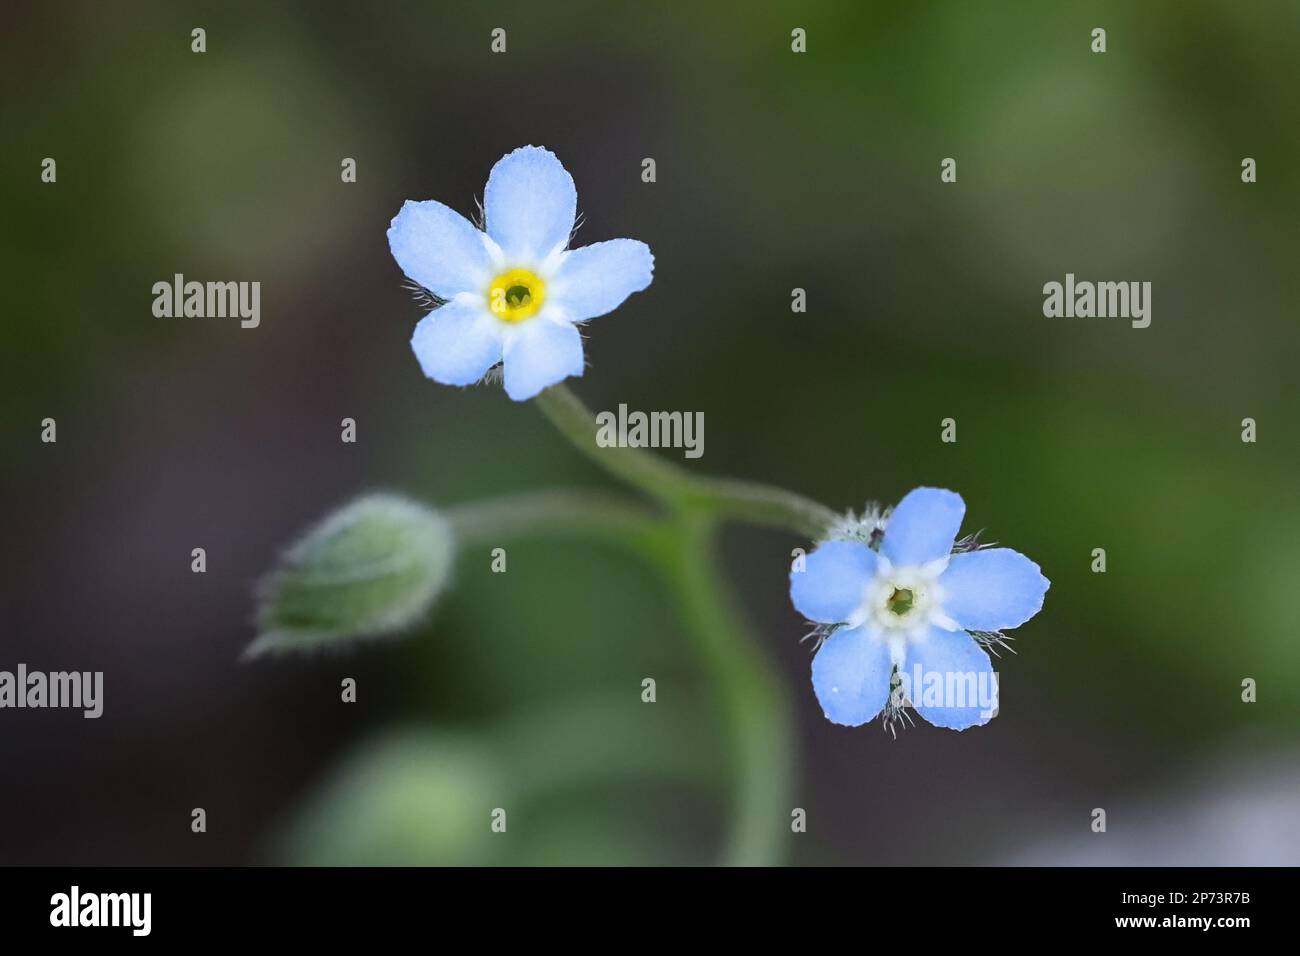 Field forget-me-not, Myosotis arvensis, also known as Common forget-me-not, wild flower from Finland Stock Photo